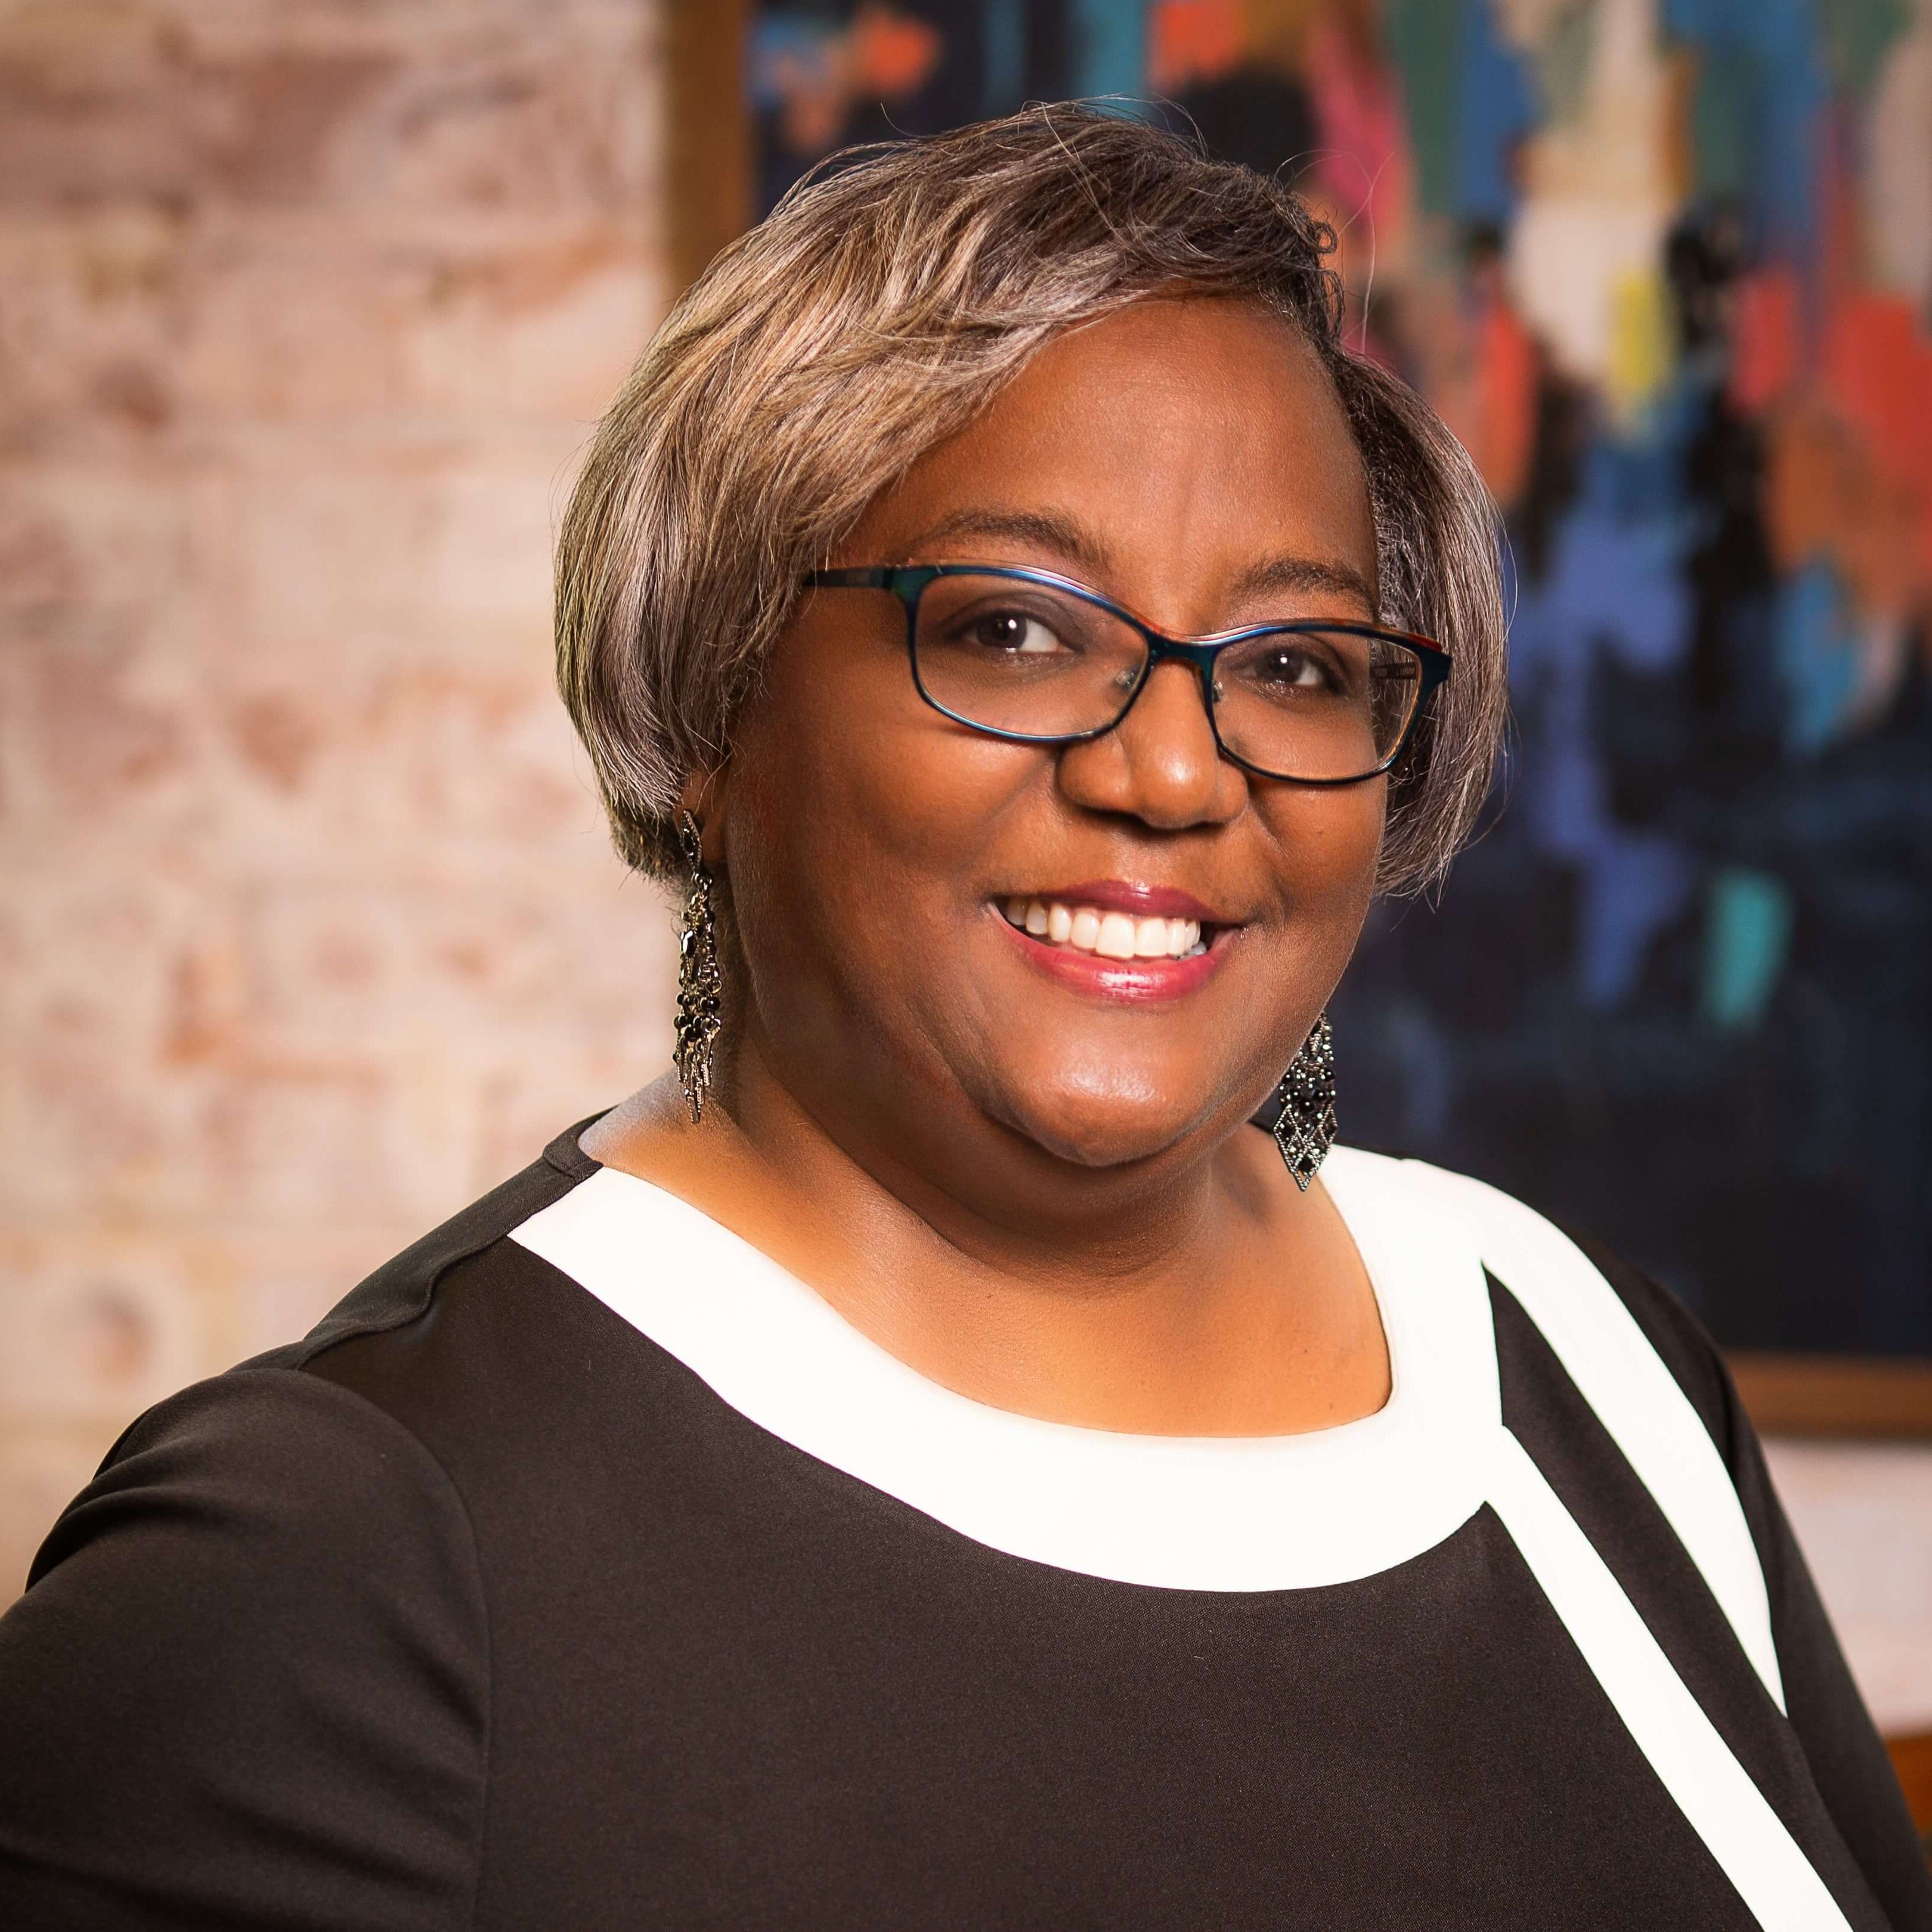 Sharon Anderson-Grooms |Capital Access Manager Metropolitan Business League